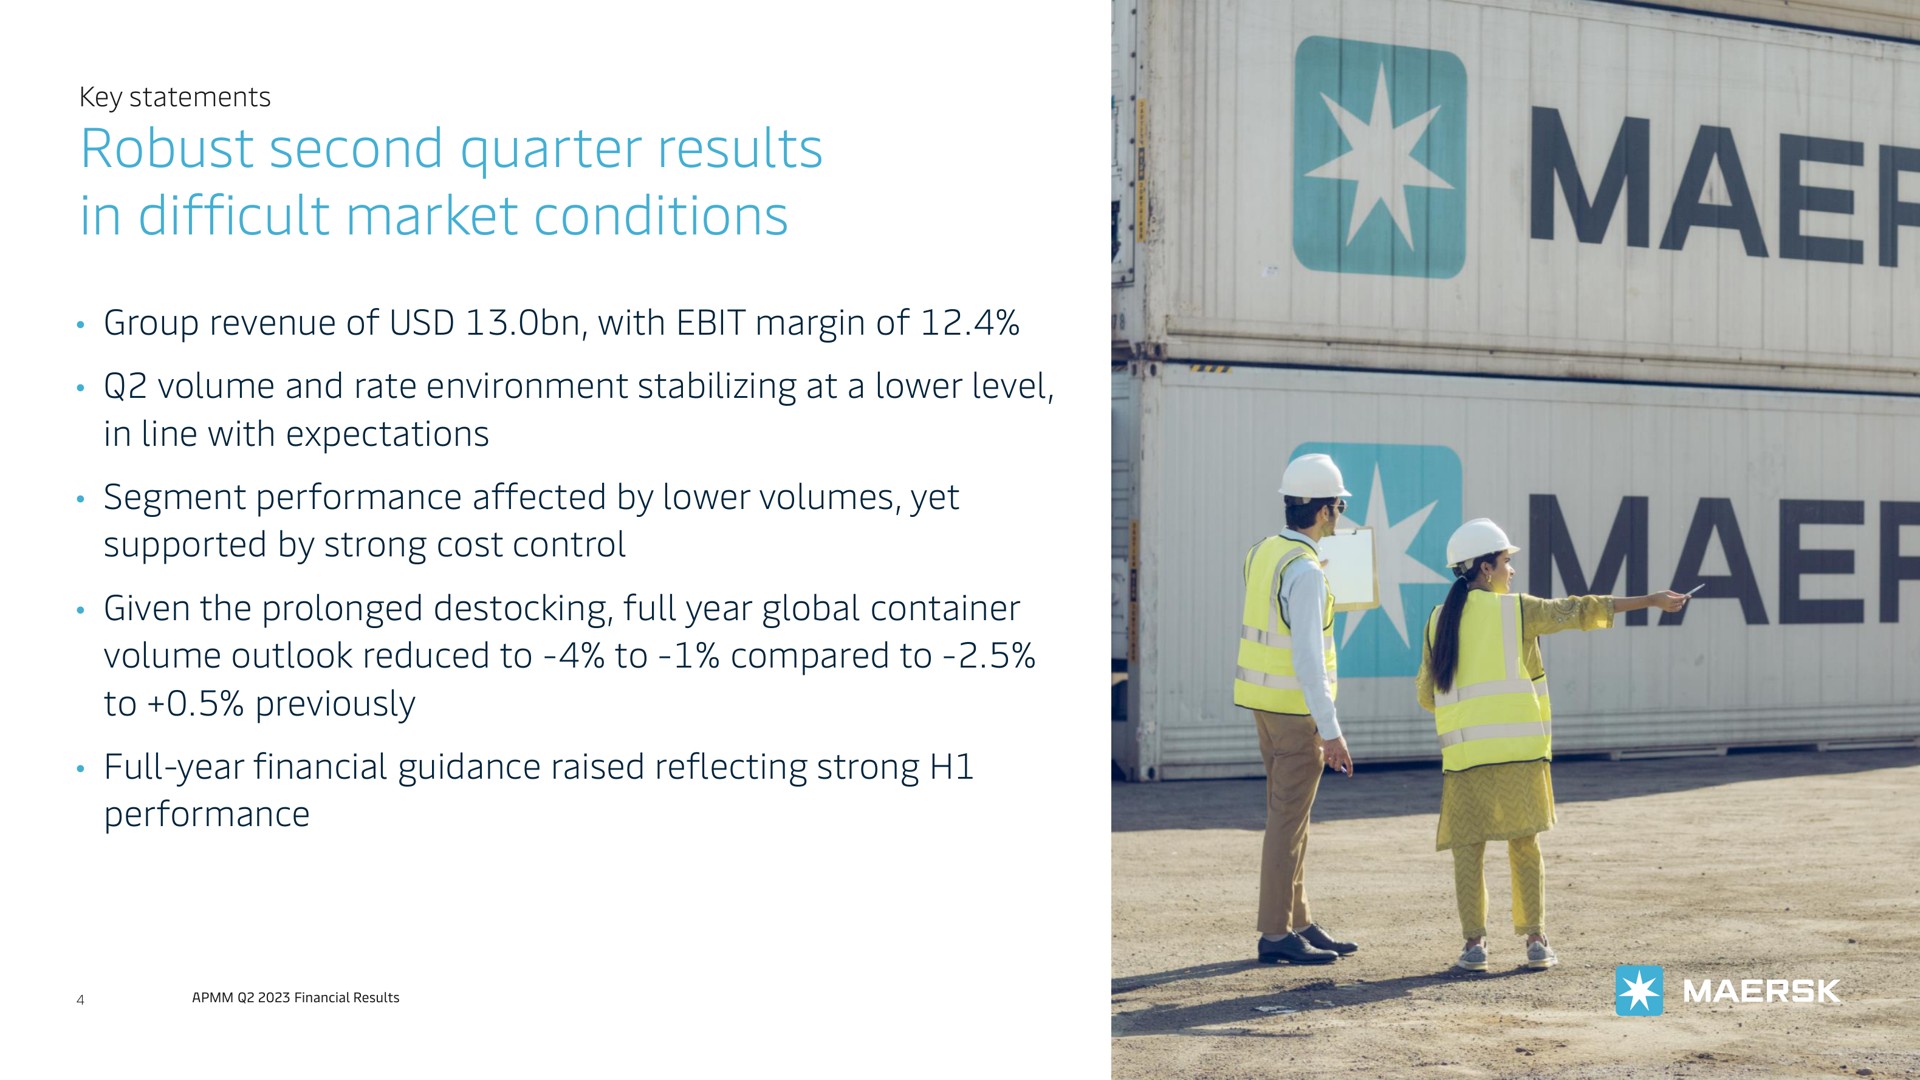 robust second quarter results in difficult market conditions | Maersk